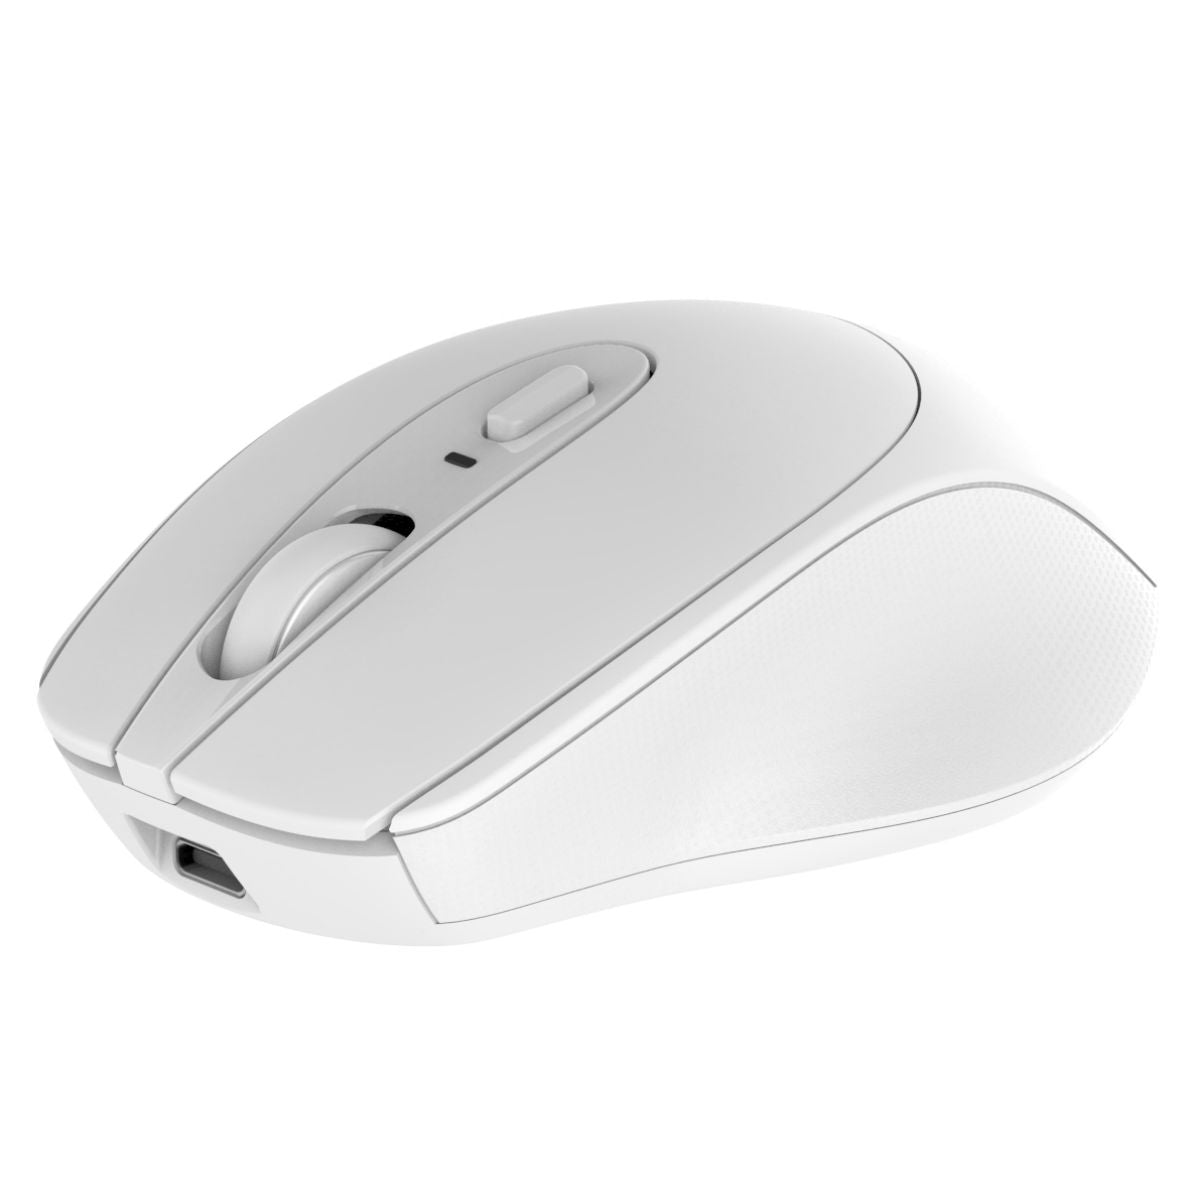 INDENA G222D Dual Mode Wireless Mouse White-Hugmie